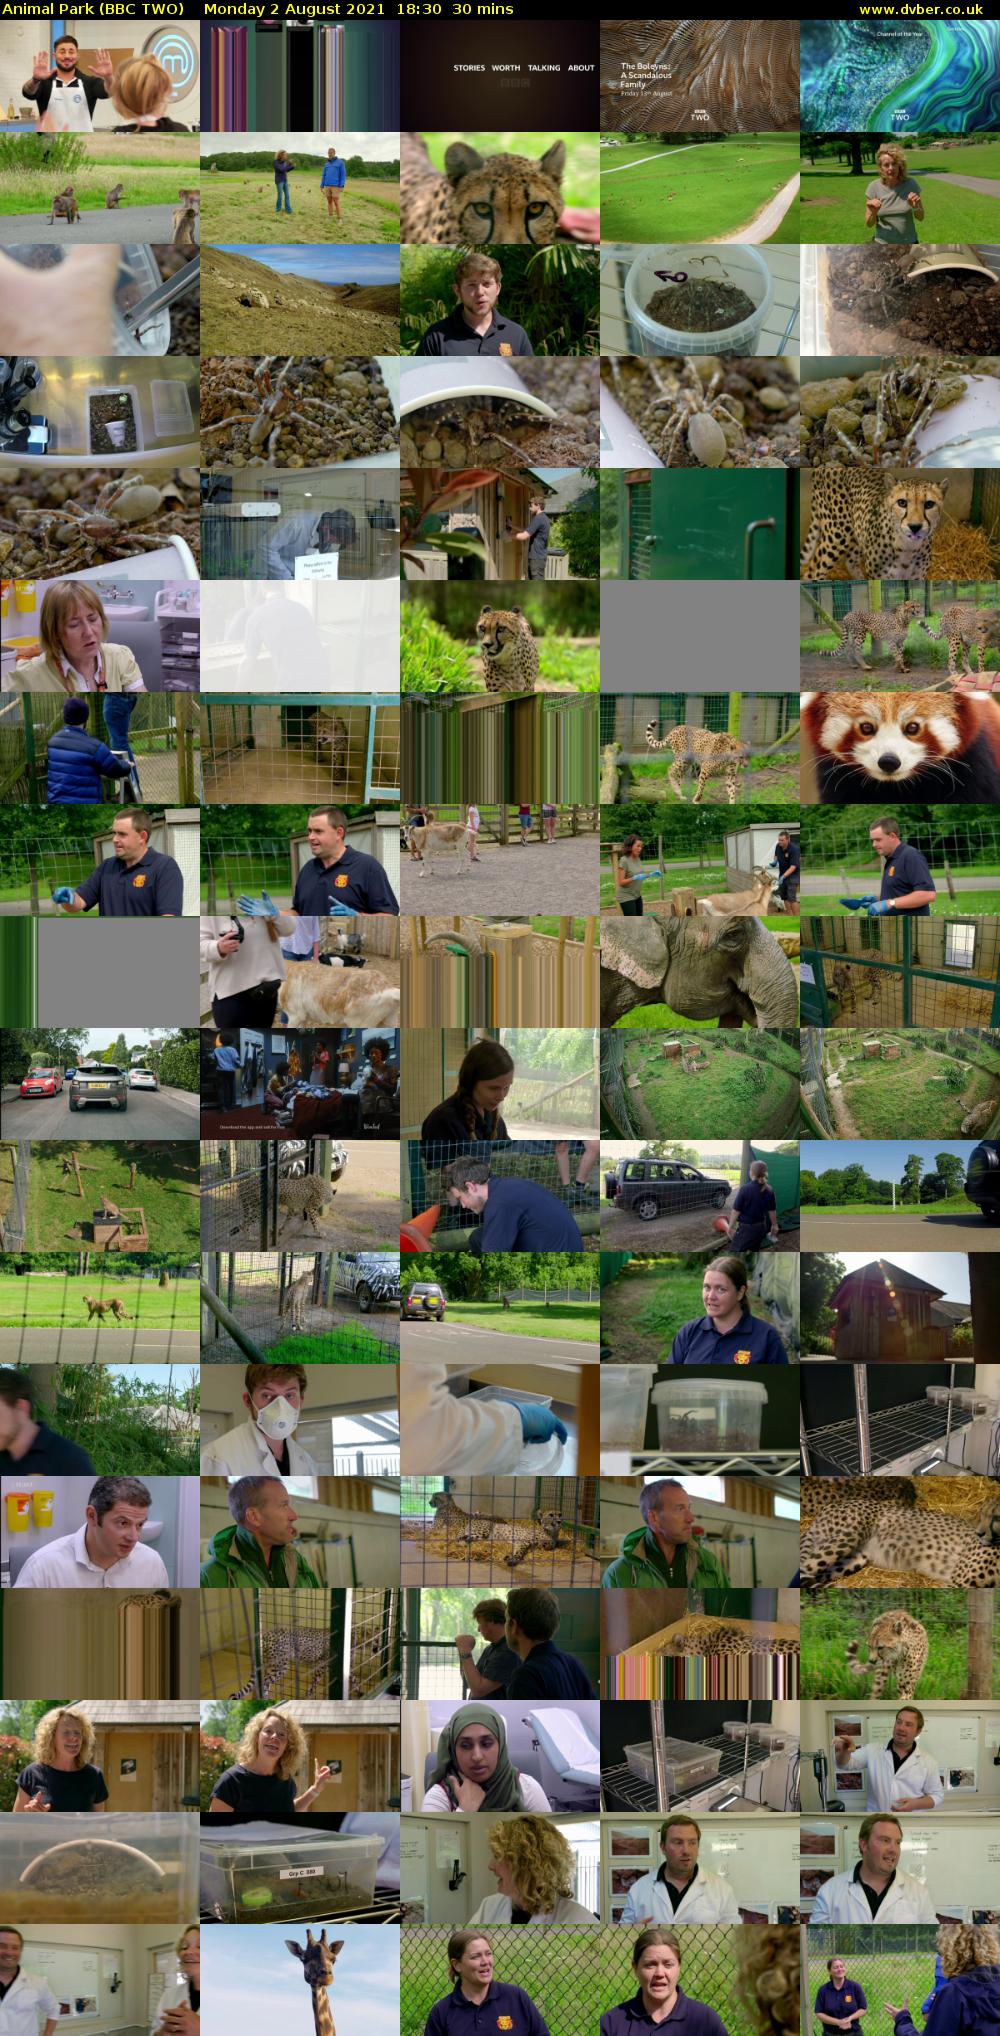 Animal Park (BBC TWO) Monday 2 August 2021 18:30 - 19:00